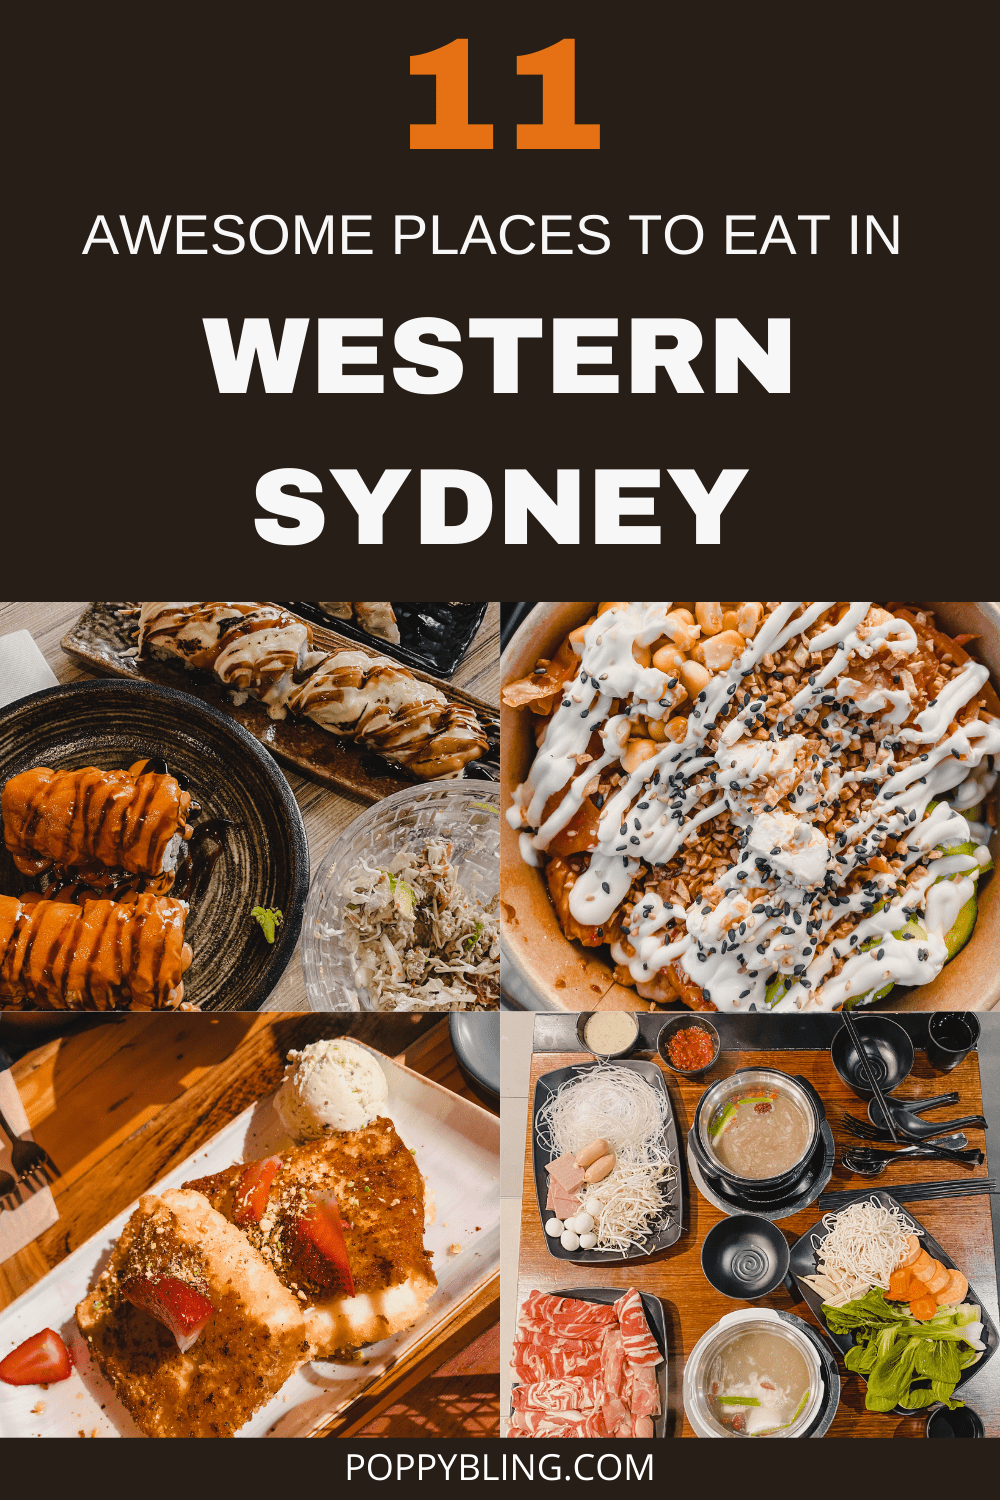 11 AWESOME PLACES TO EAT IN WESTERN SYDNEY